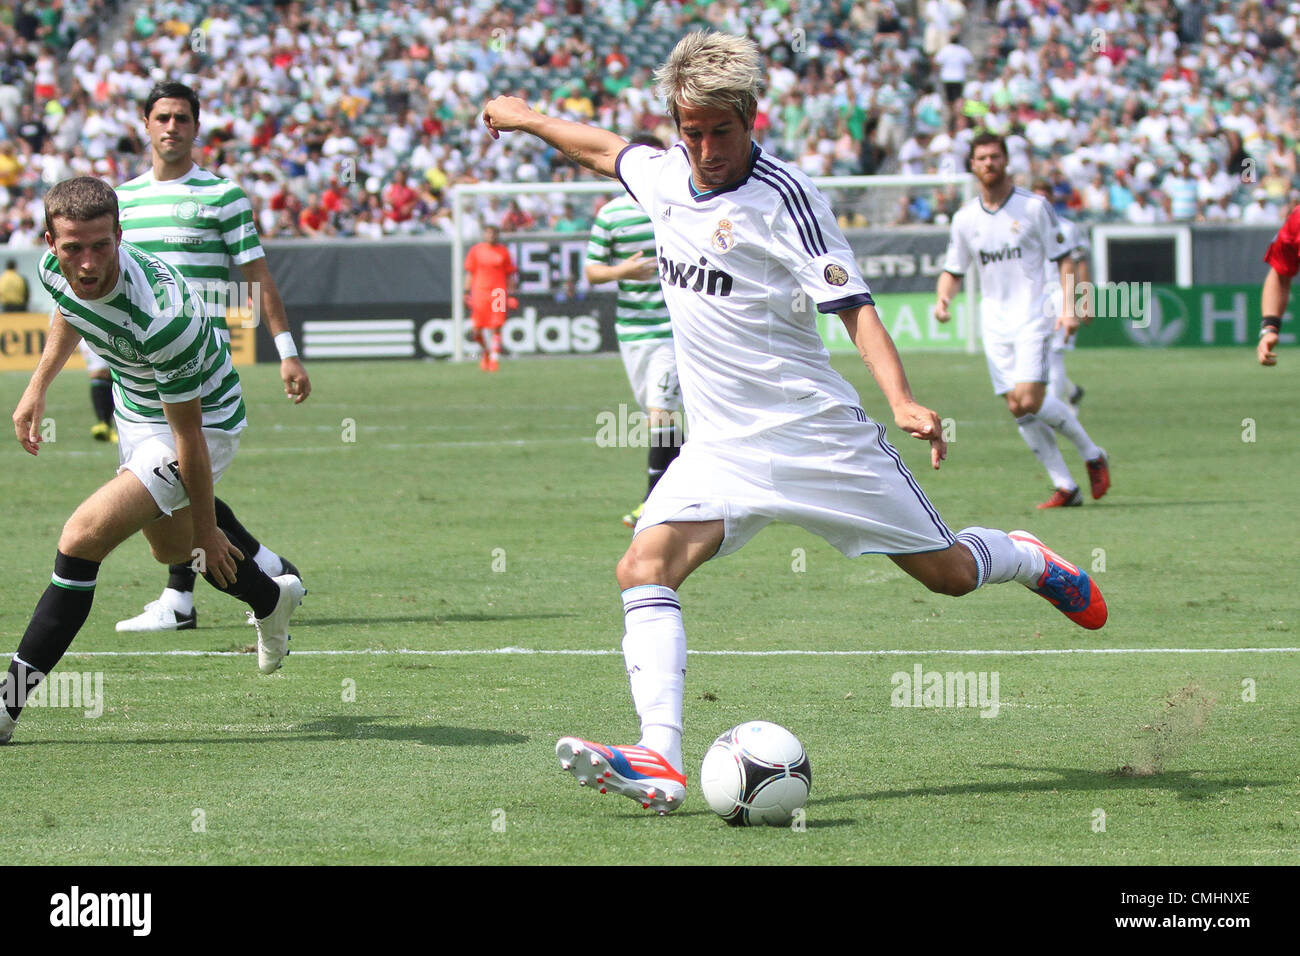 11.08.2012. Philadelphia, USA.  Real Madrid midfielder Fabio Coentrao (15) fires a shot at net in the World Football Challenge match between Real Madrid and Celtic FC at Lincoln Financial Field in Philadelphia, PA. Real Madrid defeated Celtic 2-0. Stock Photo